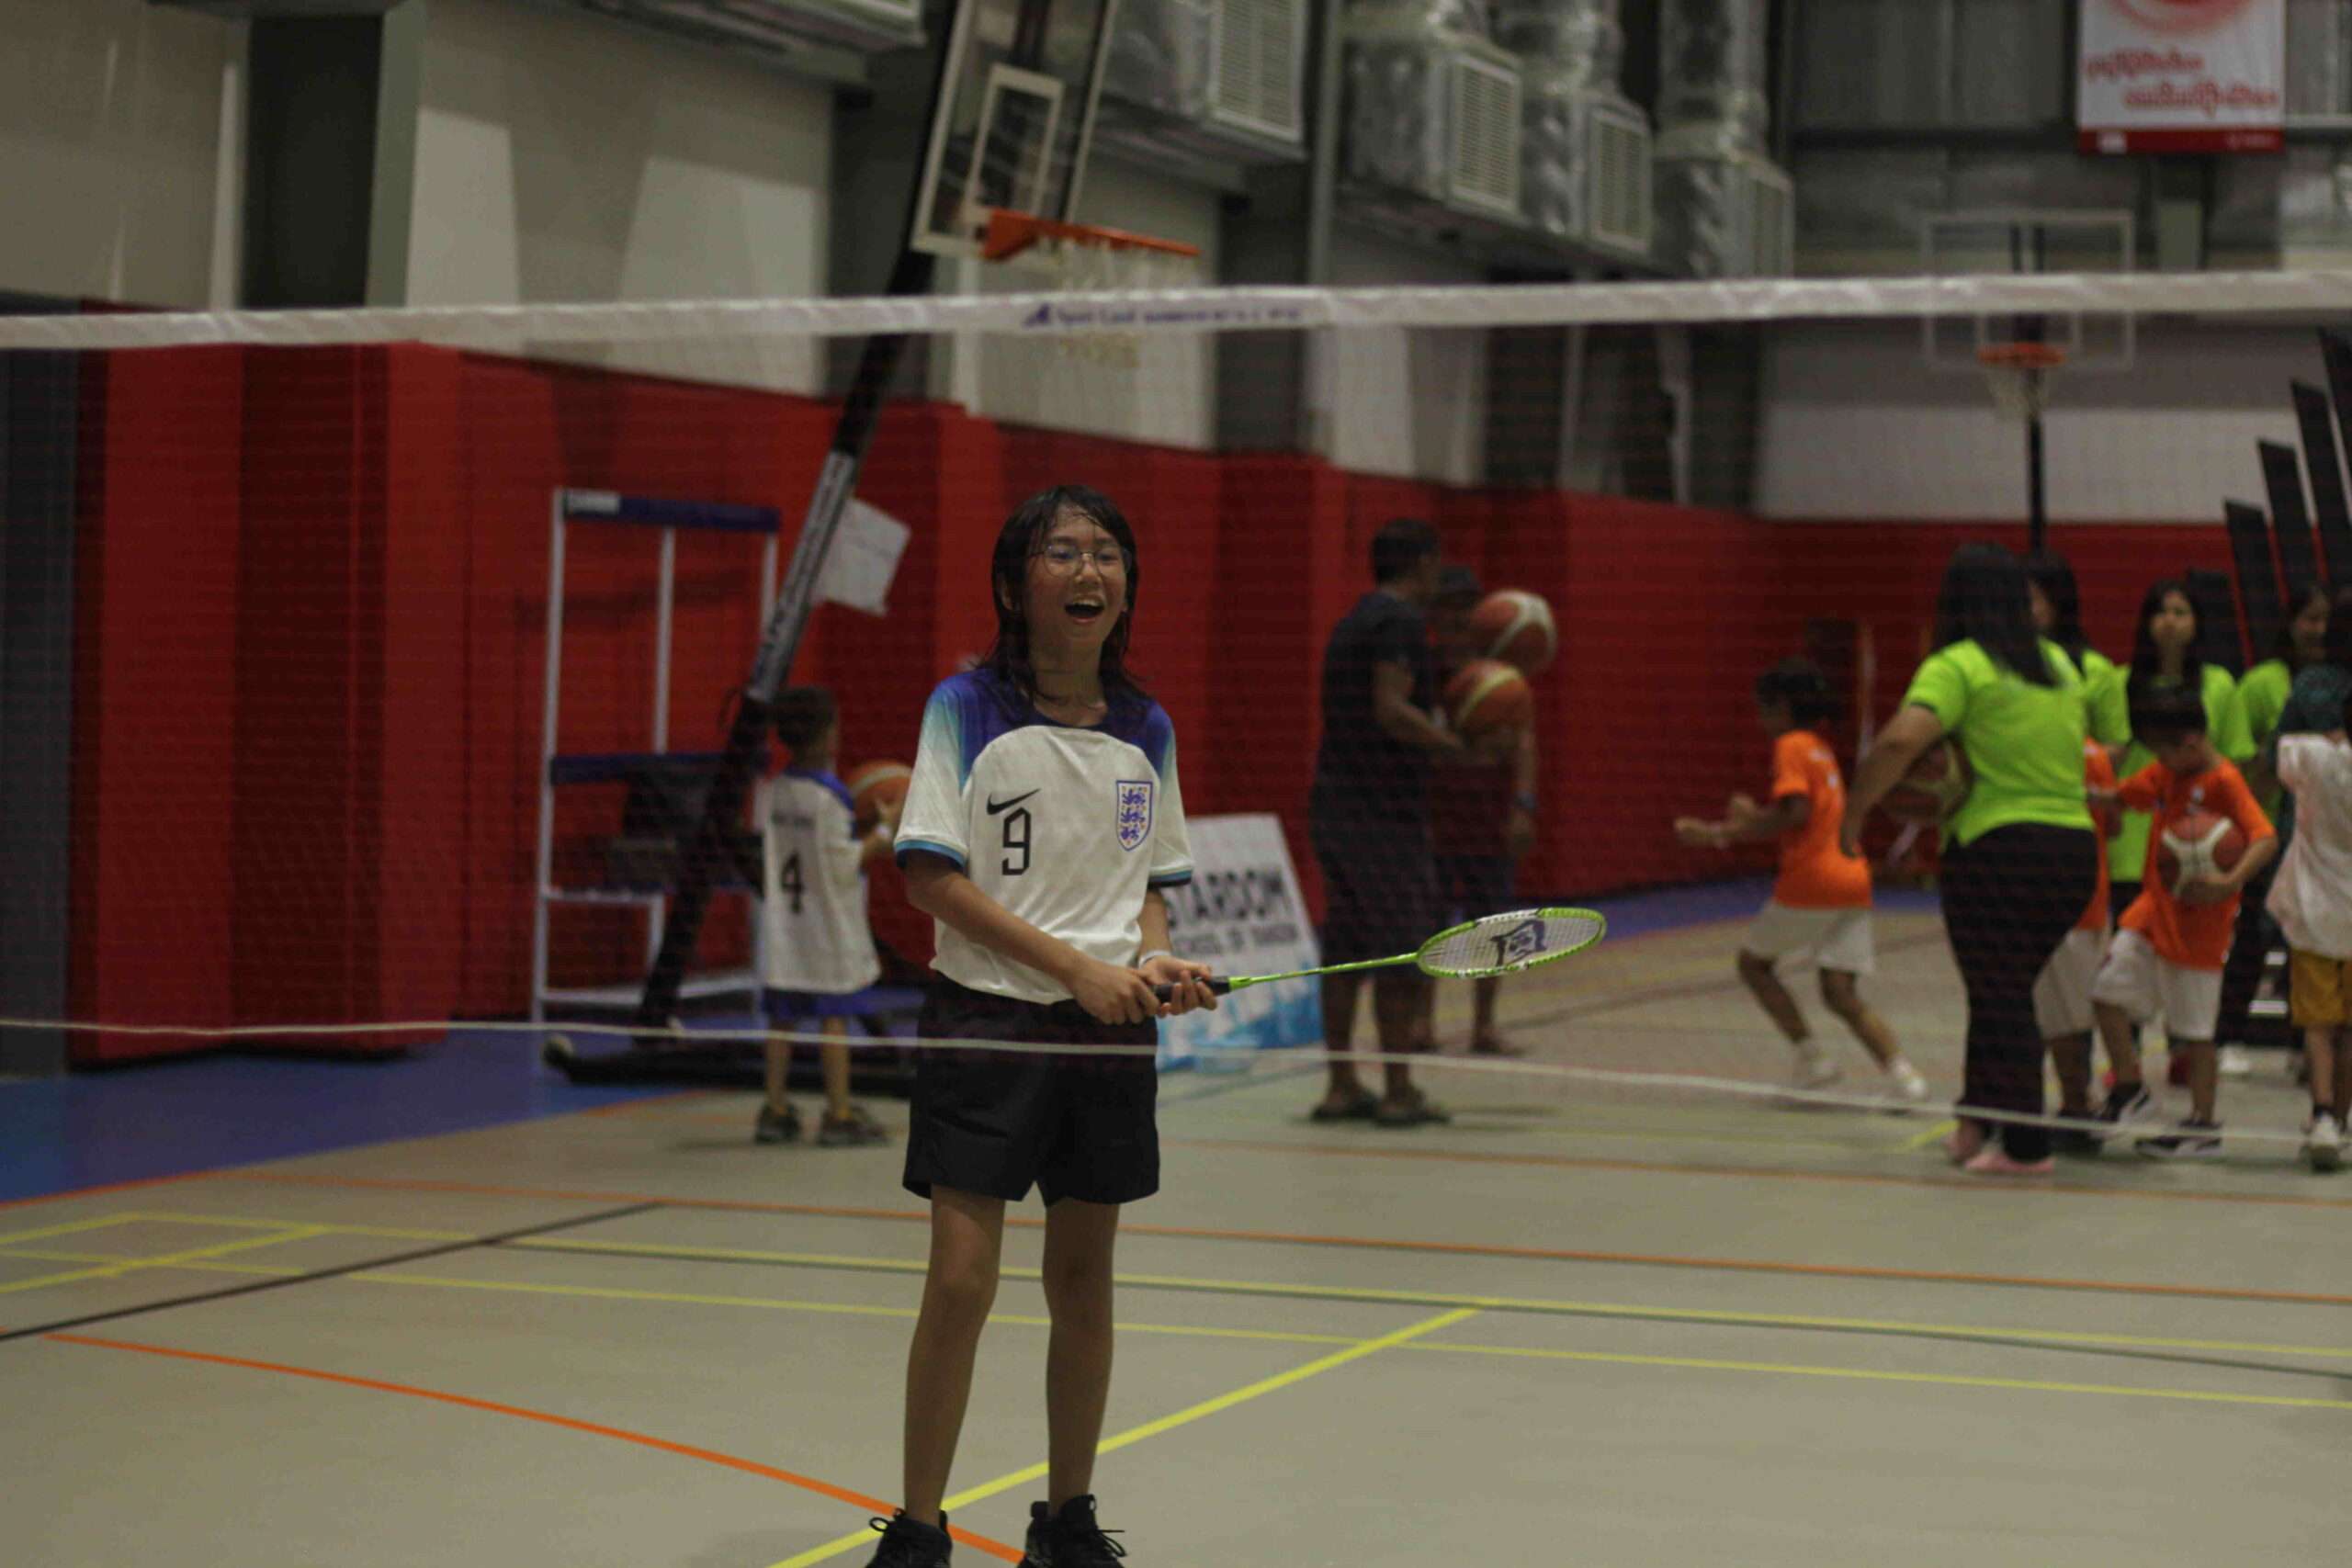 a girl holding a racket in a badminton court